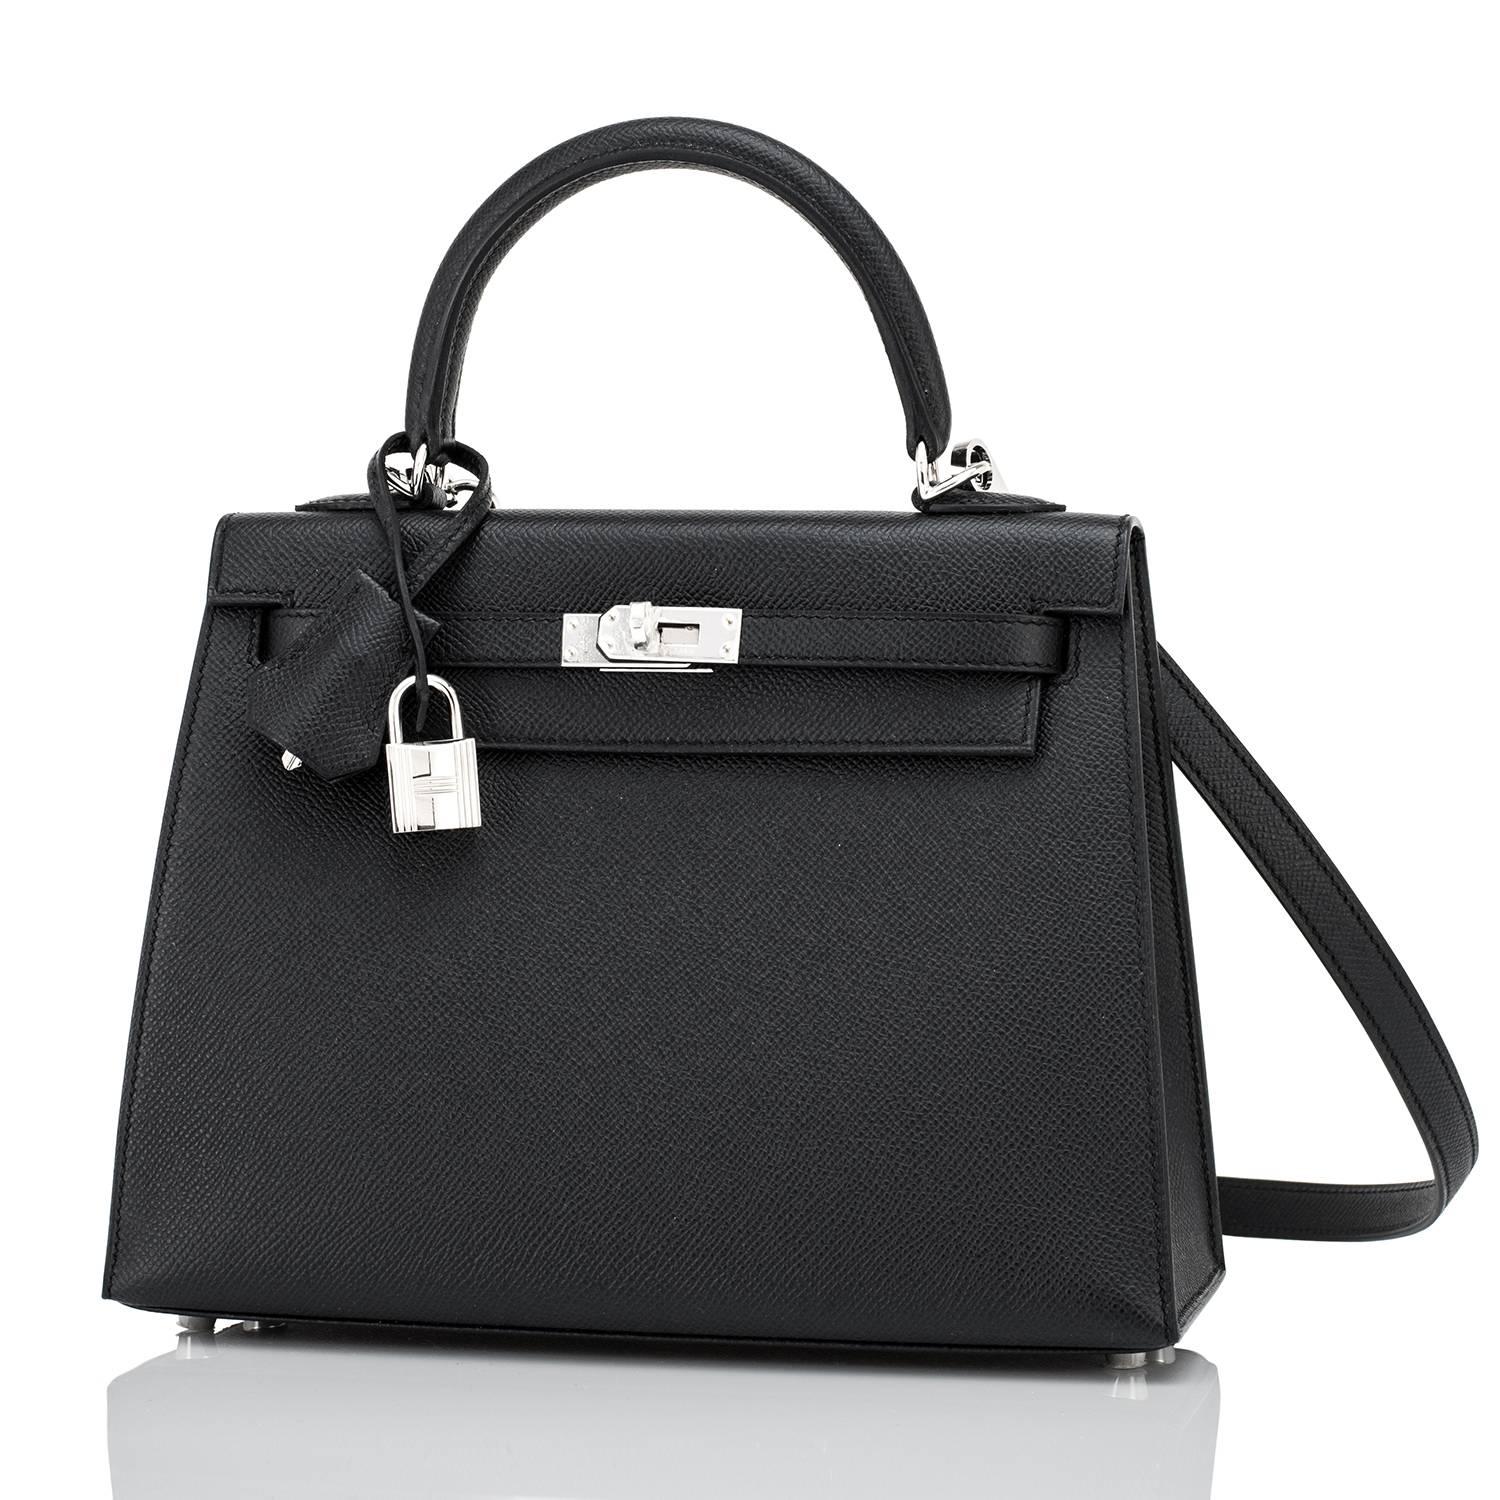 Uber Chic Hermes Jet Black 25cm Kelly Epsom Sellier Palladium Y Stamp, 2020
Brand New in Box. Store Fresh. Pristine Condition (with plastic on hardware).
Just purchased from Hermes store; bag bears new interior 2020 Y Stamp.
Perfect gift! Comes full